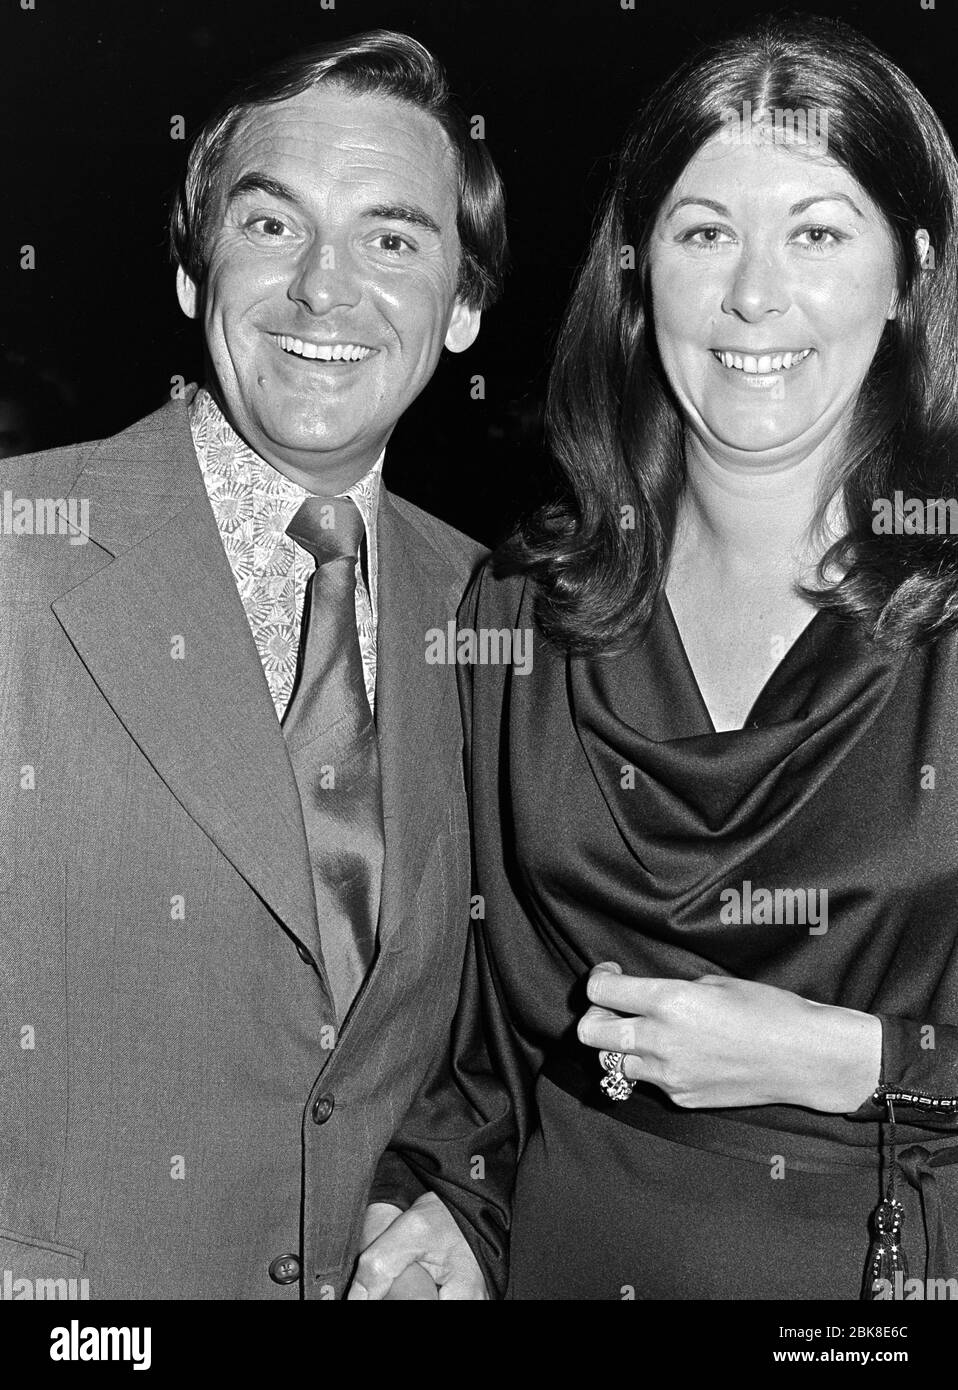 LONDON, UK. October 1974: Comedian Bob Monkhouse & wife at the premiere of 'That's Entertainment' in London.  File photo © Paul Smith/Featureflash Stock Photo